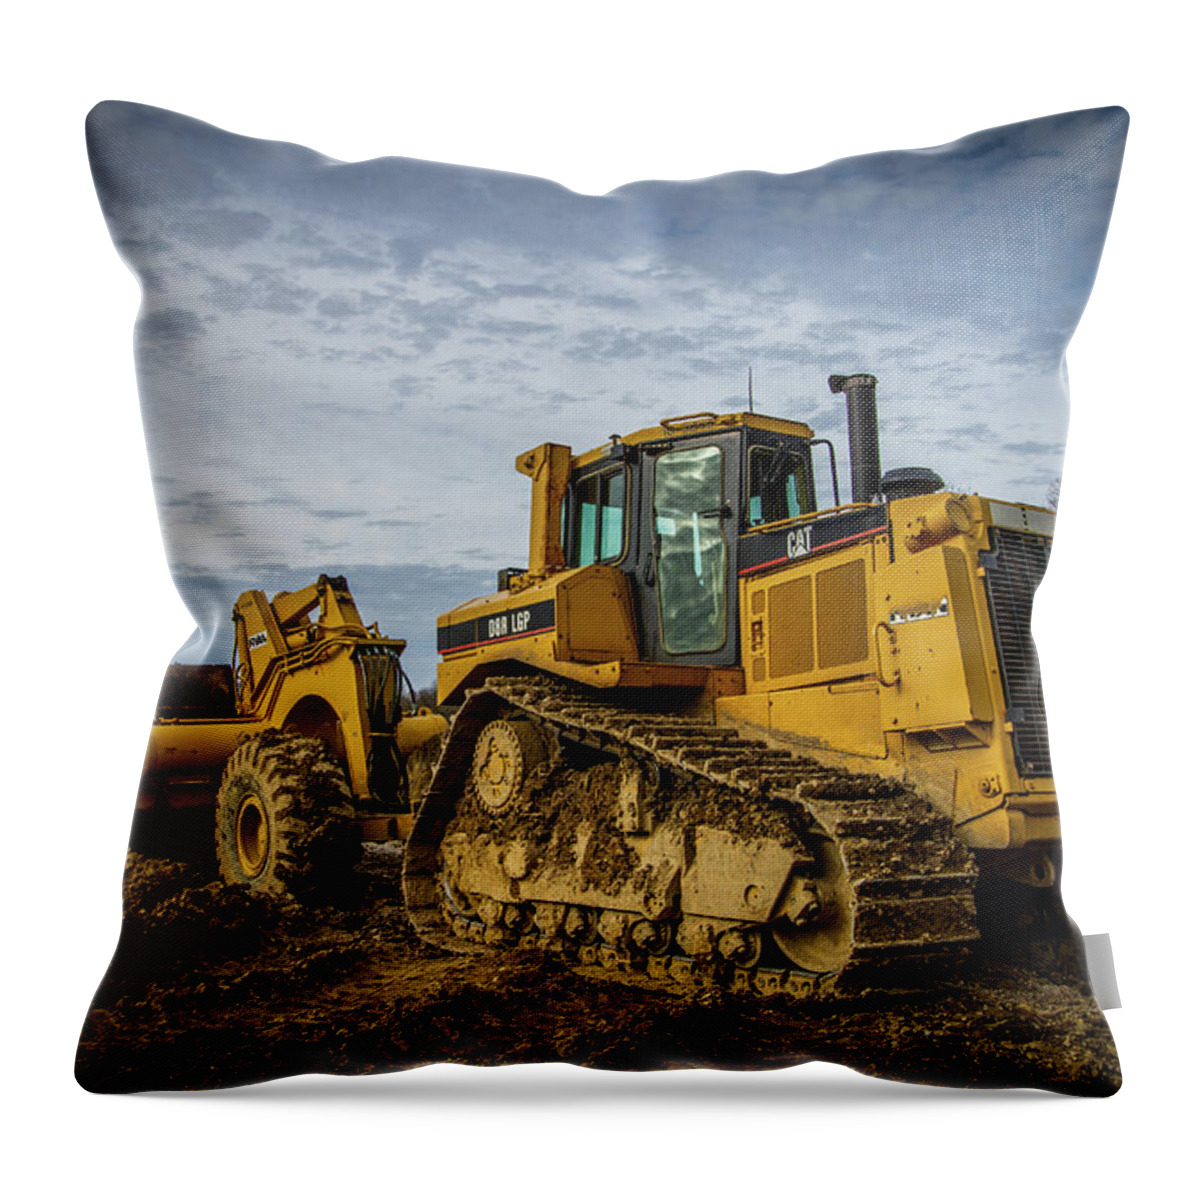 Construction Throw Pillow featuring the photograph Cat Construction by Mike Burgquist